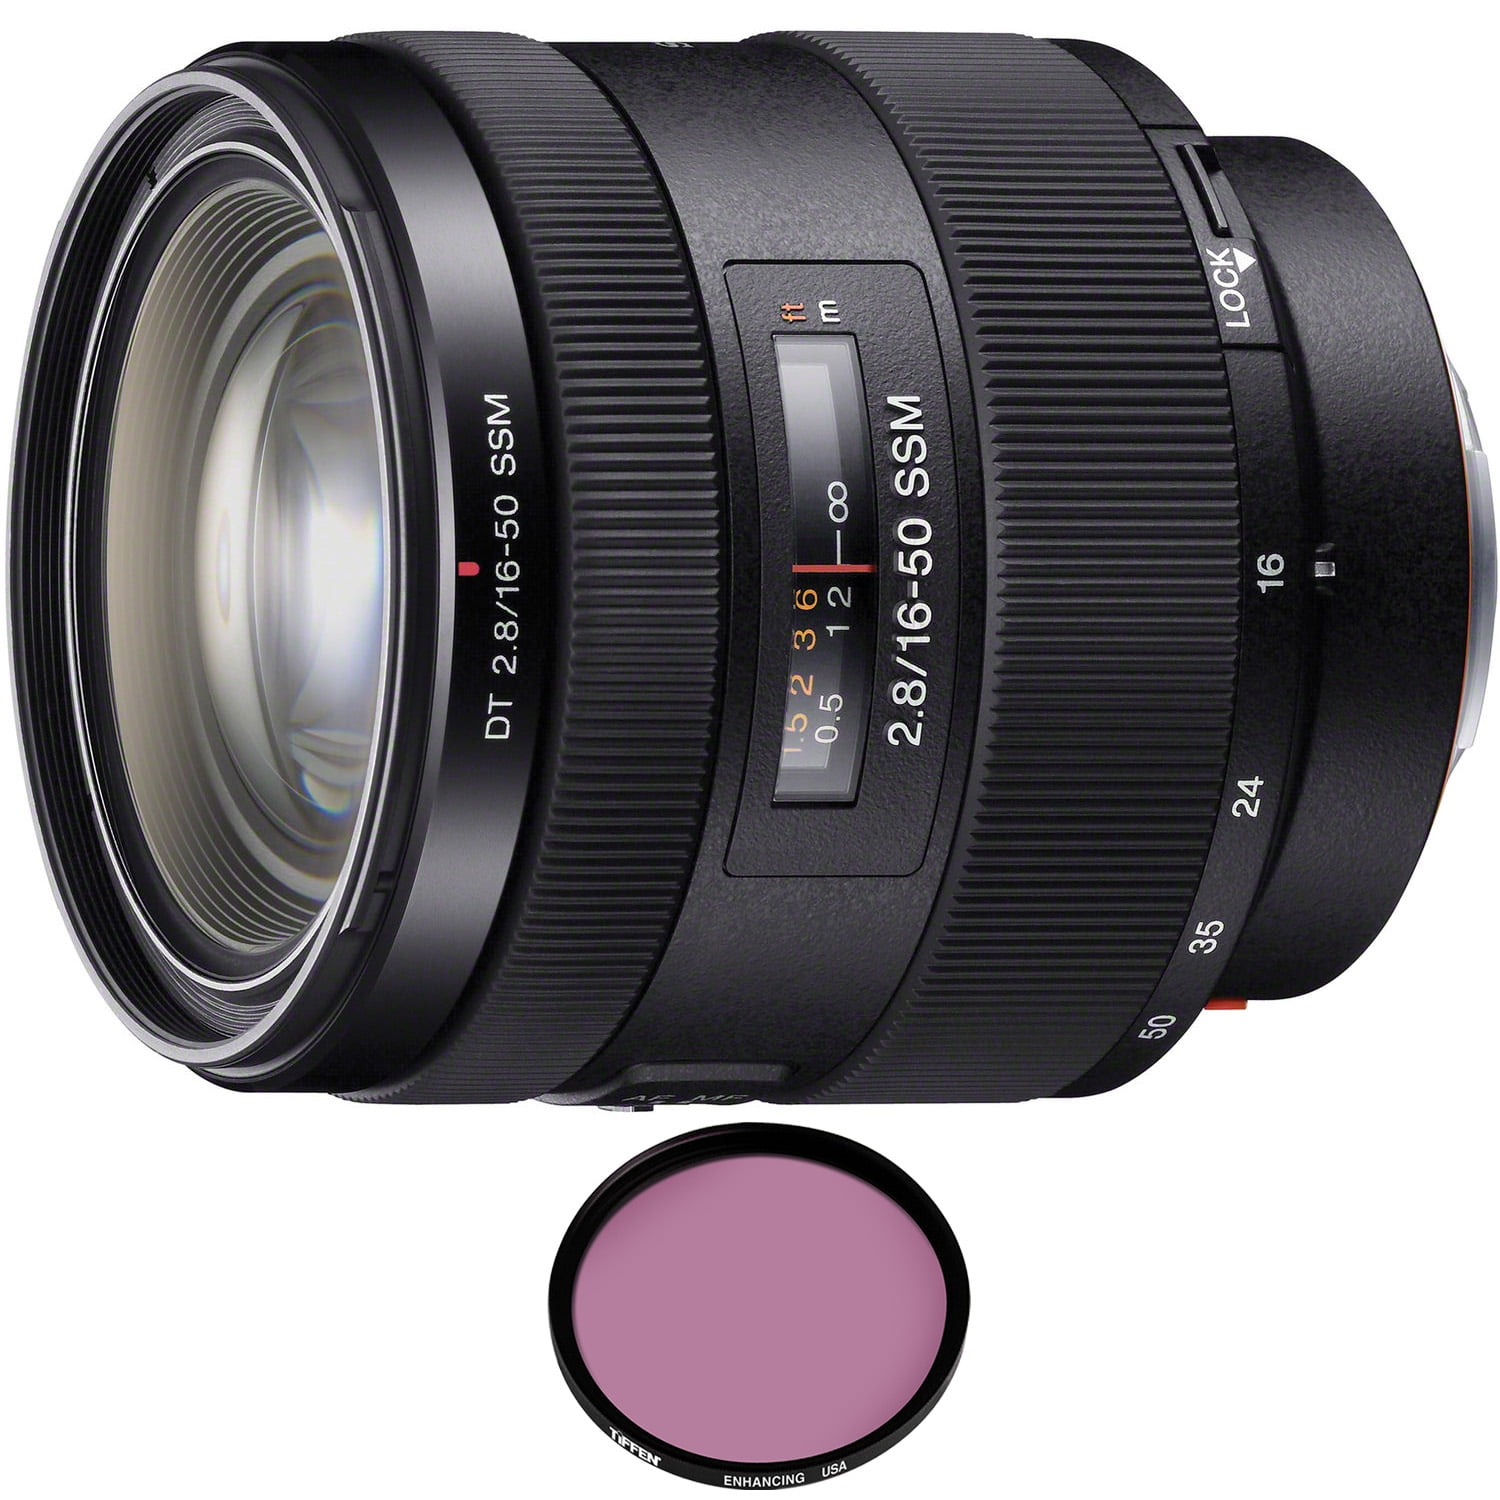 Sony DT 16-50mm f/2.8 SSM Lens with Pro Filter (Certified Refurbished